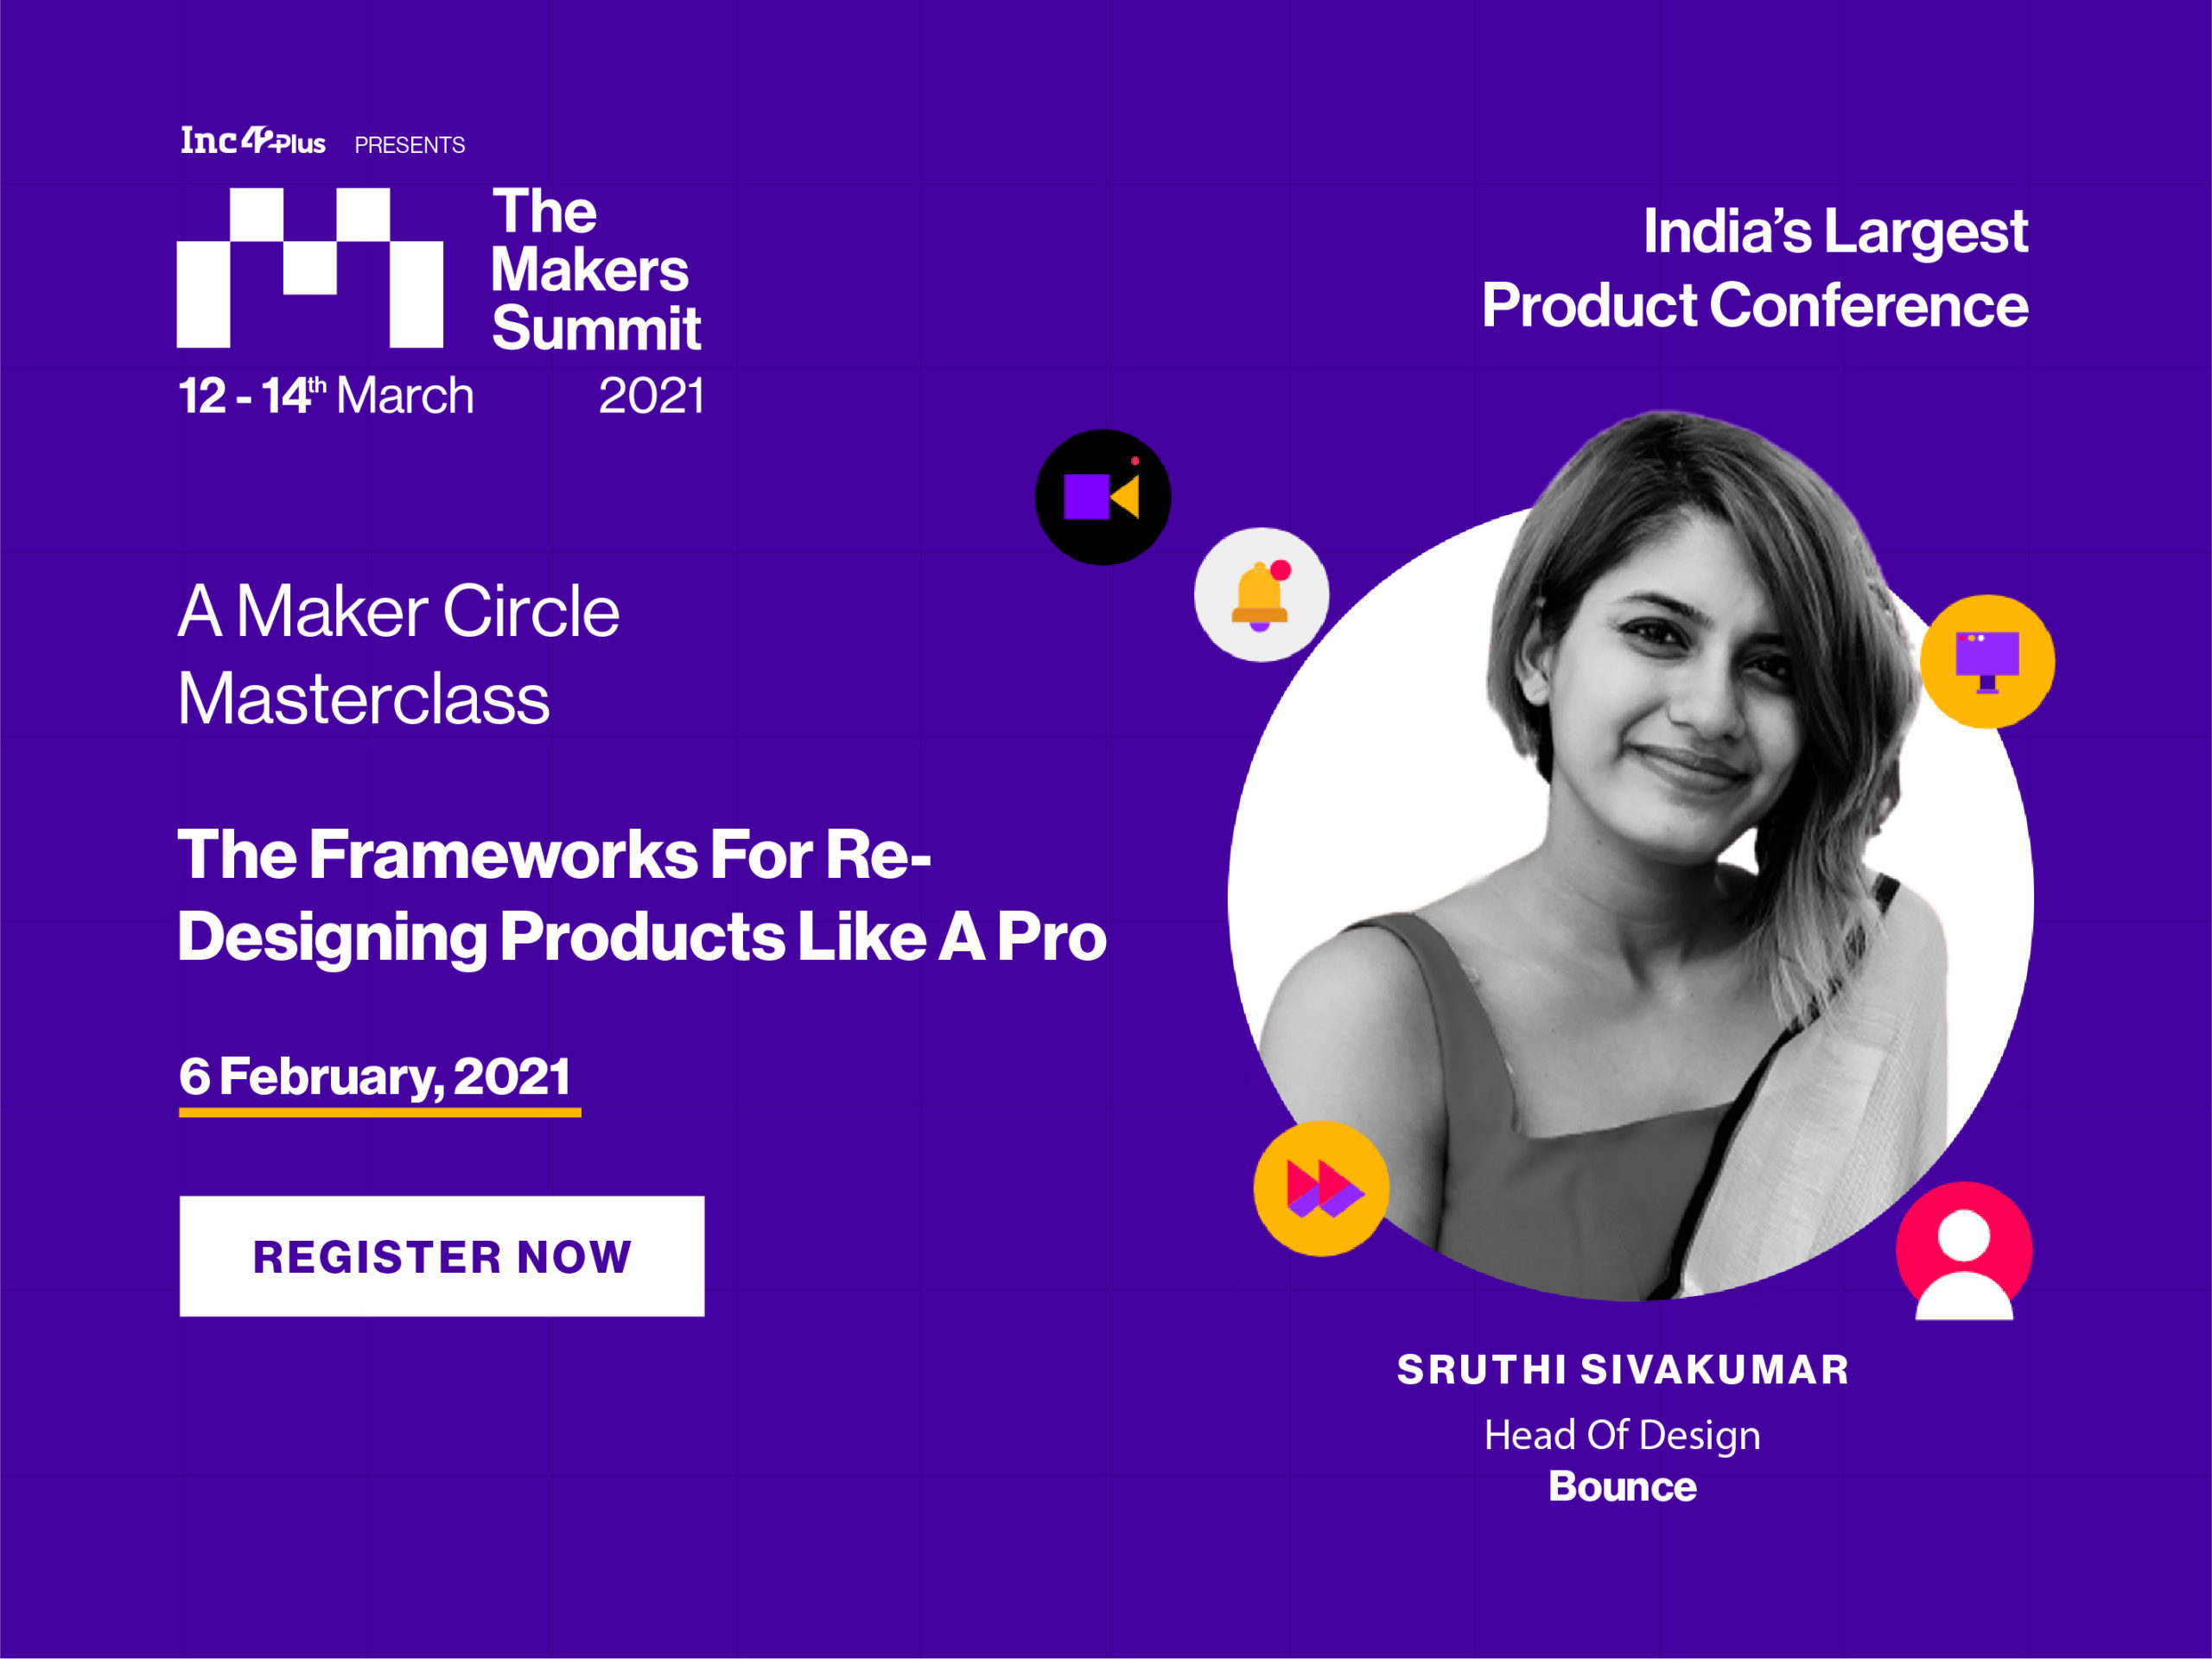 Register For The Masterclass On “The Frameworks For Re-Designing Products Like A Pro”